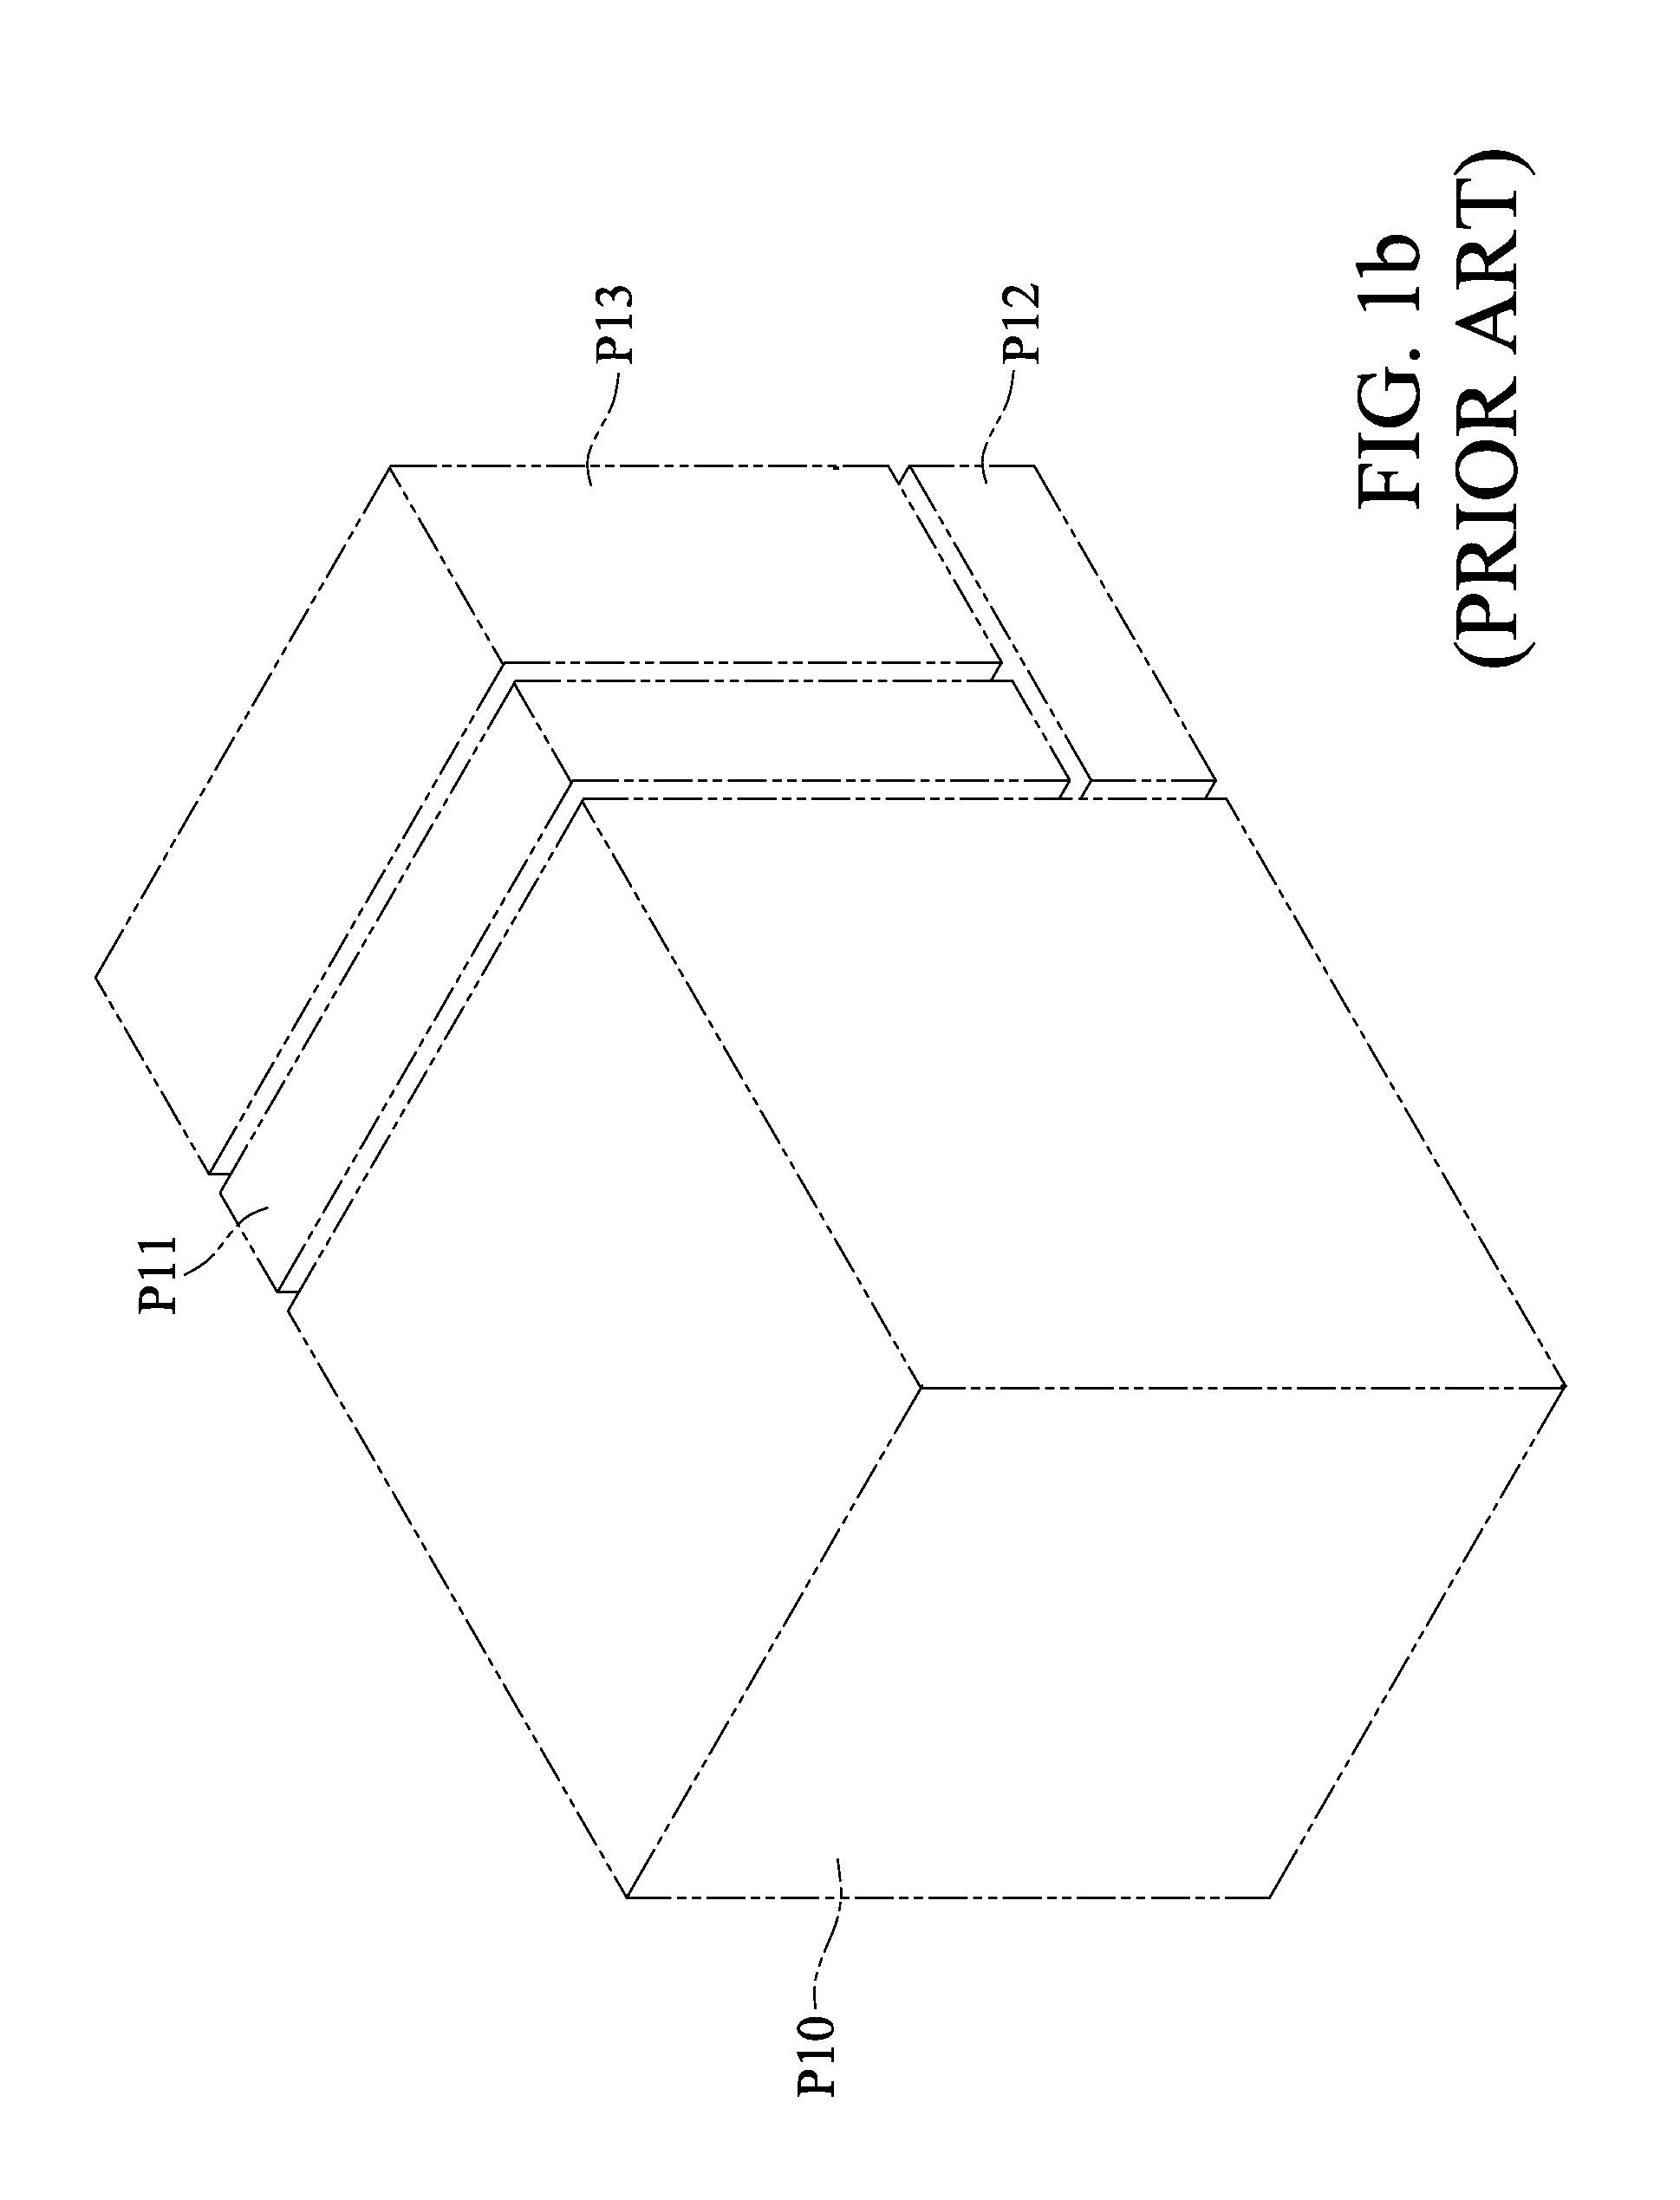 Chassis partition architecture for multi-processor system